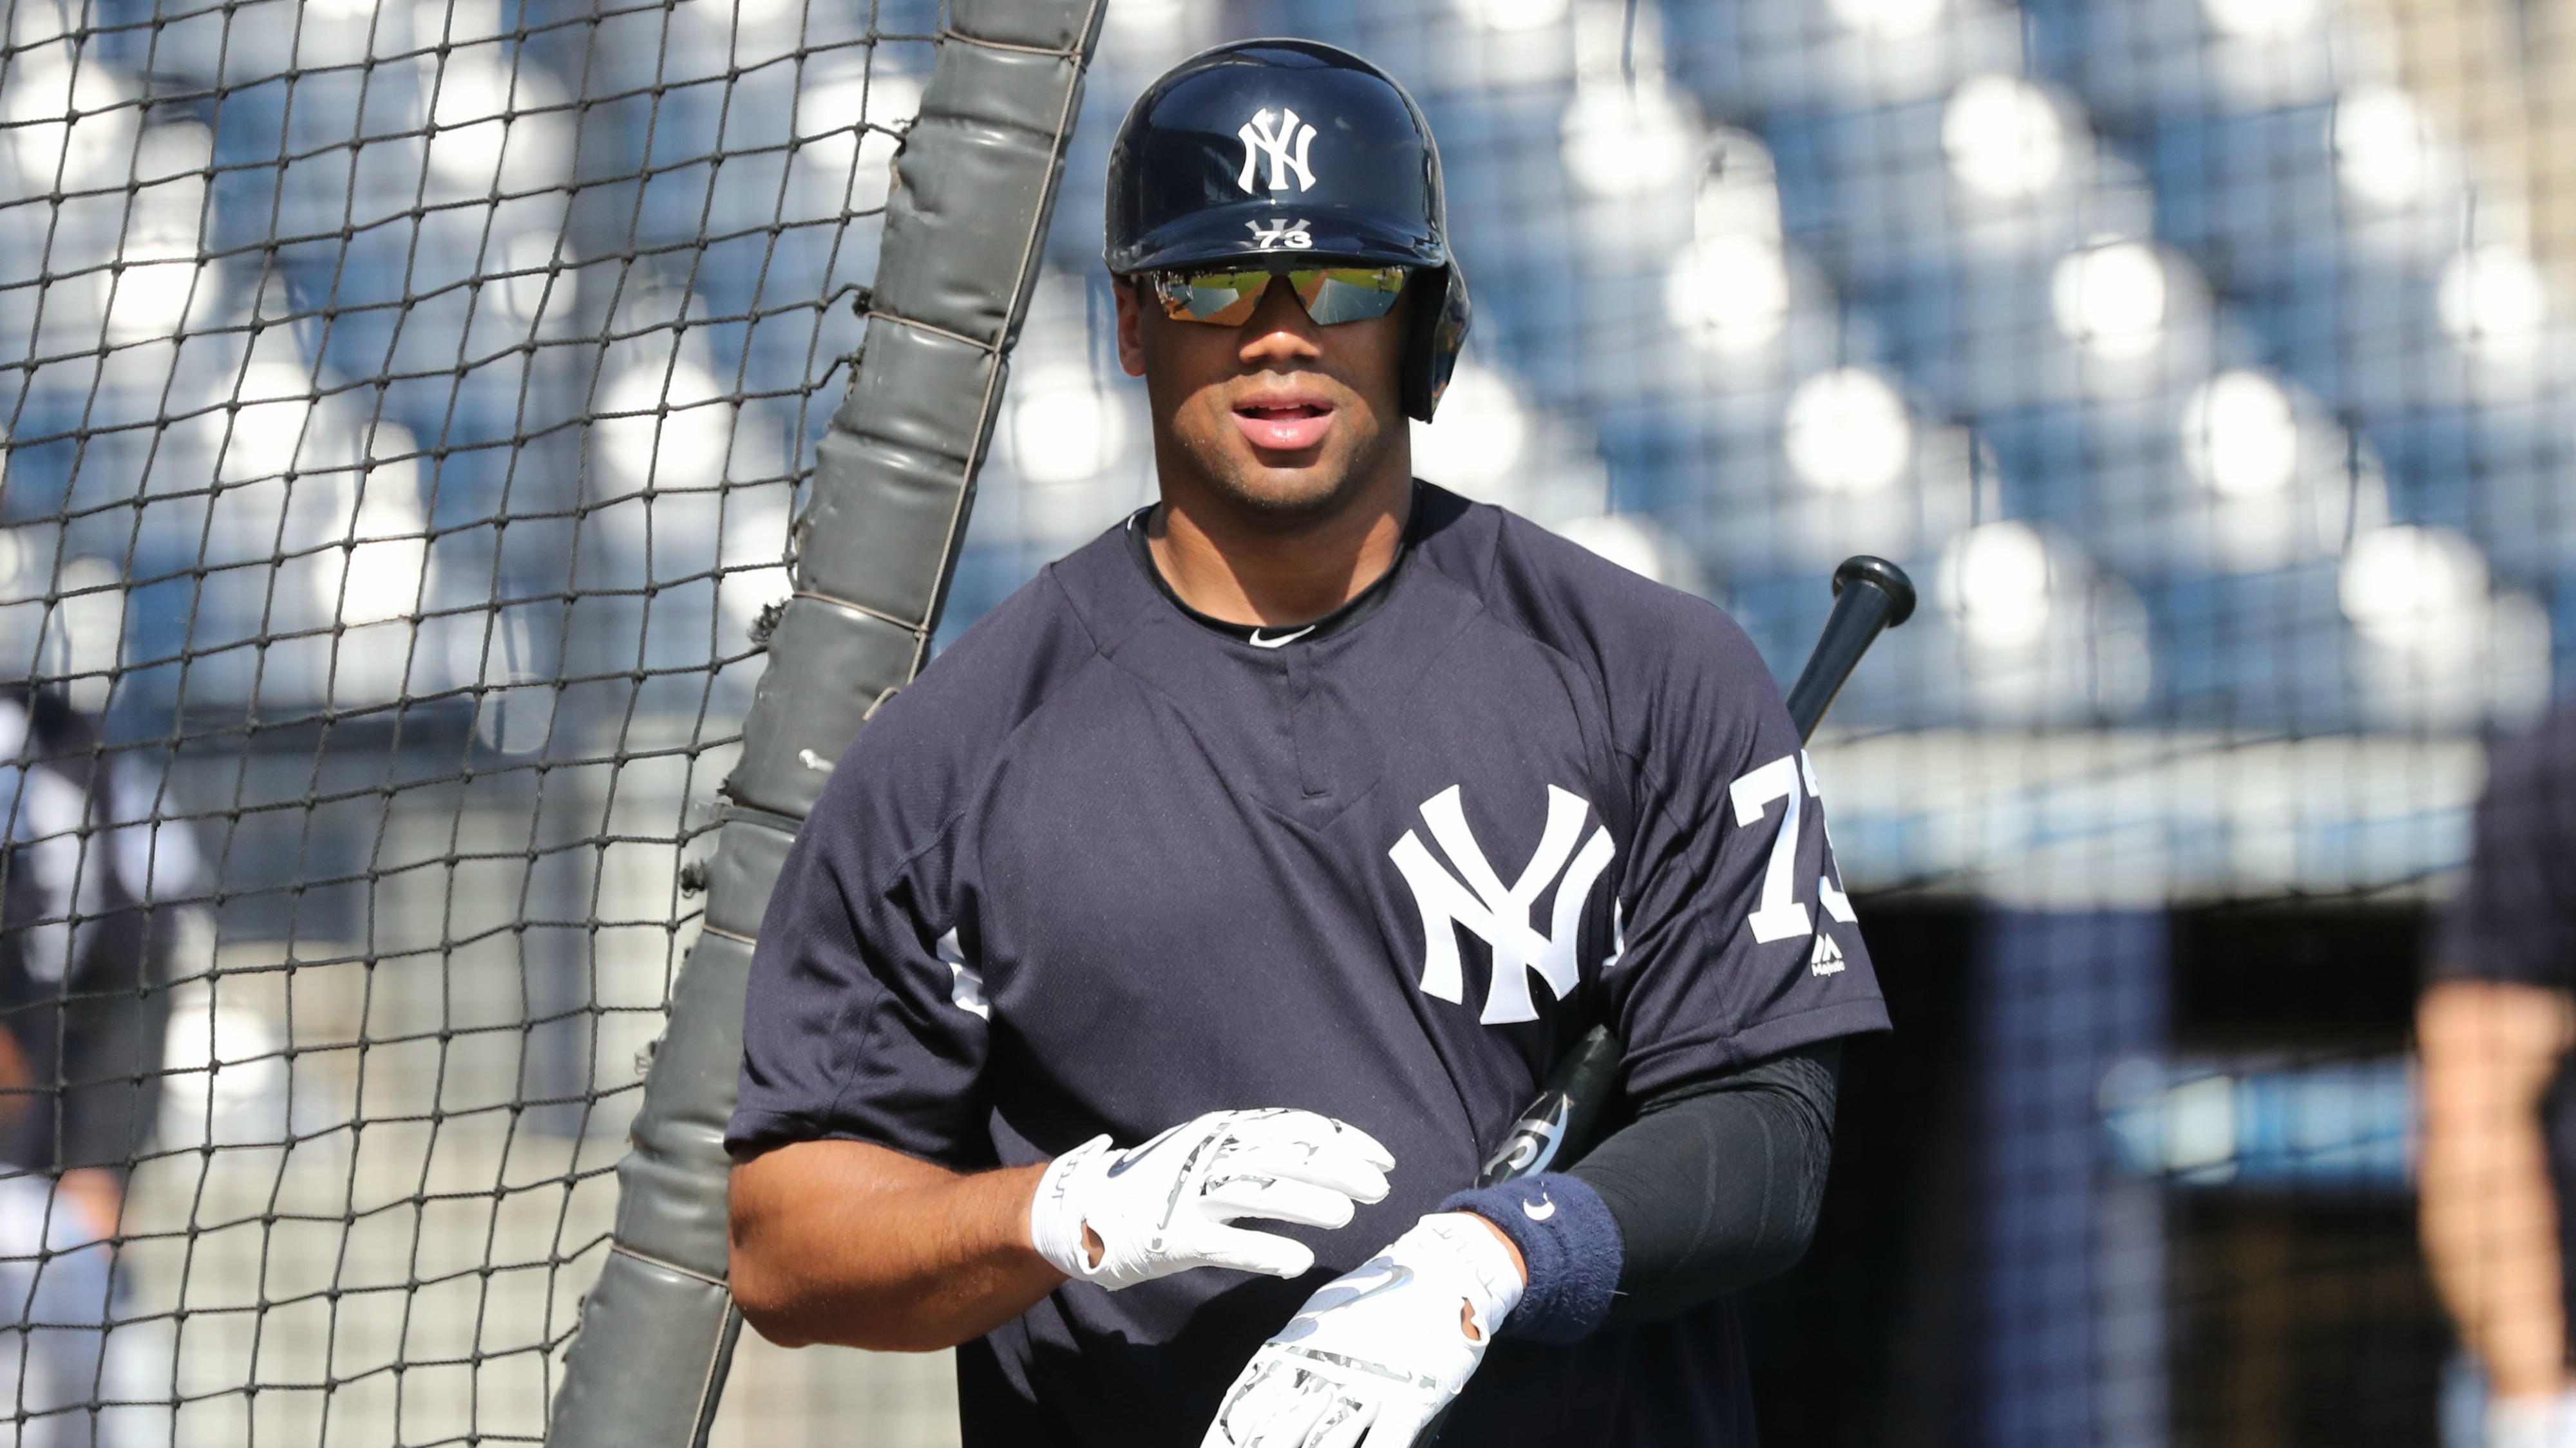 Russell Wilson strikes out in Yanks spring training debut